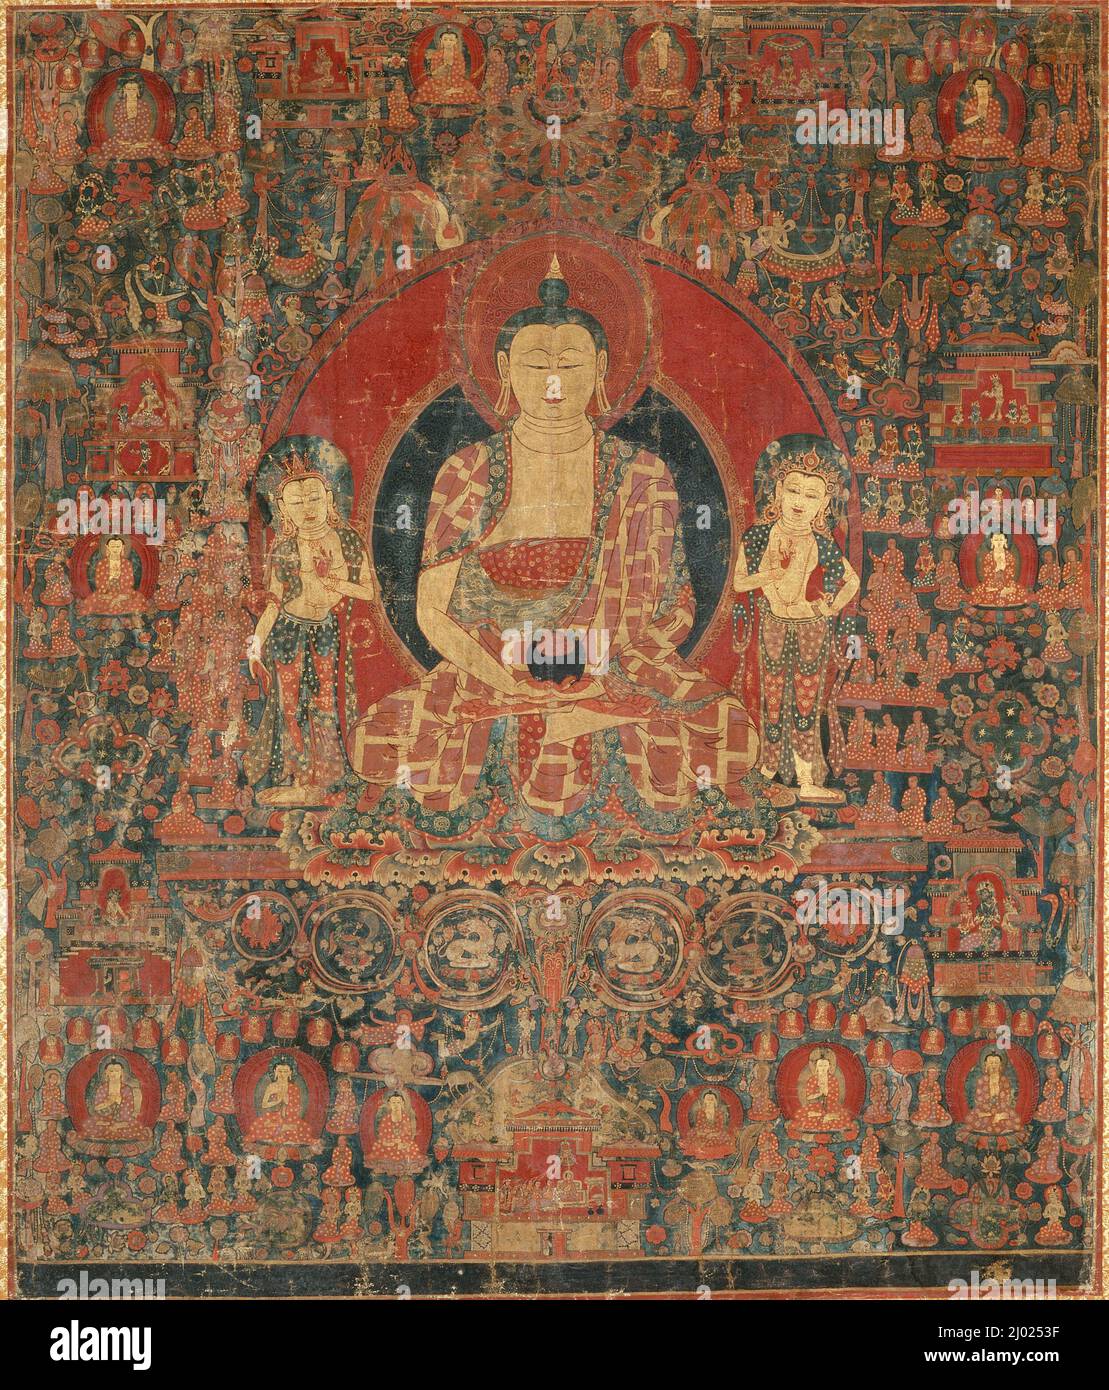 The Jina Buddha of Infinite Light (Amitabha) in His Pure Land Paradise (Sukhavati). Western Tibet, Guge, 15th century. Paintings. Mineral pigments on cotton cloth Stock Photo